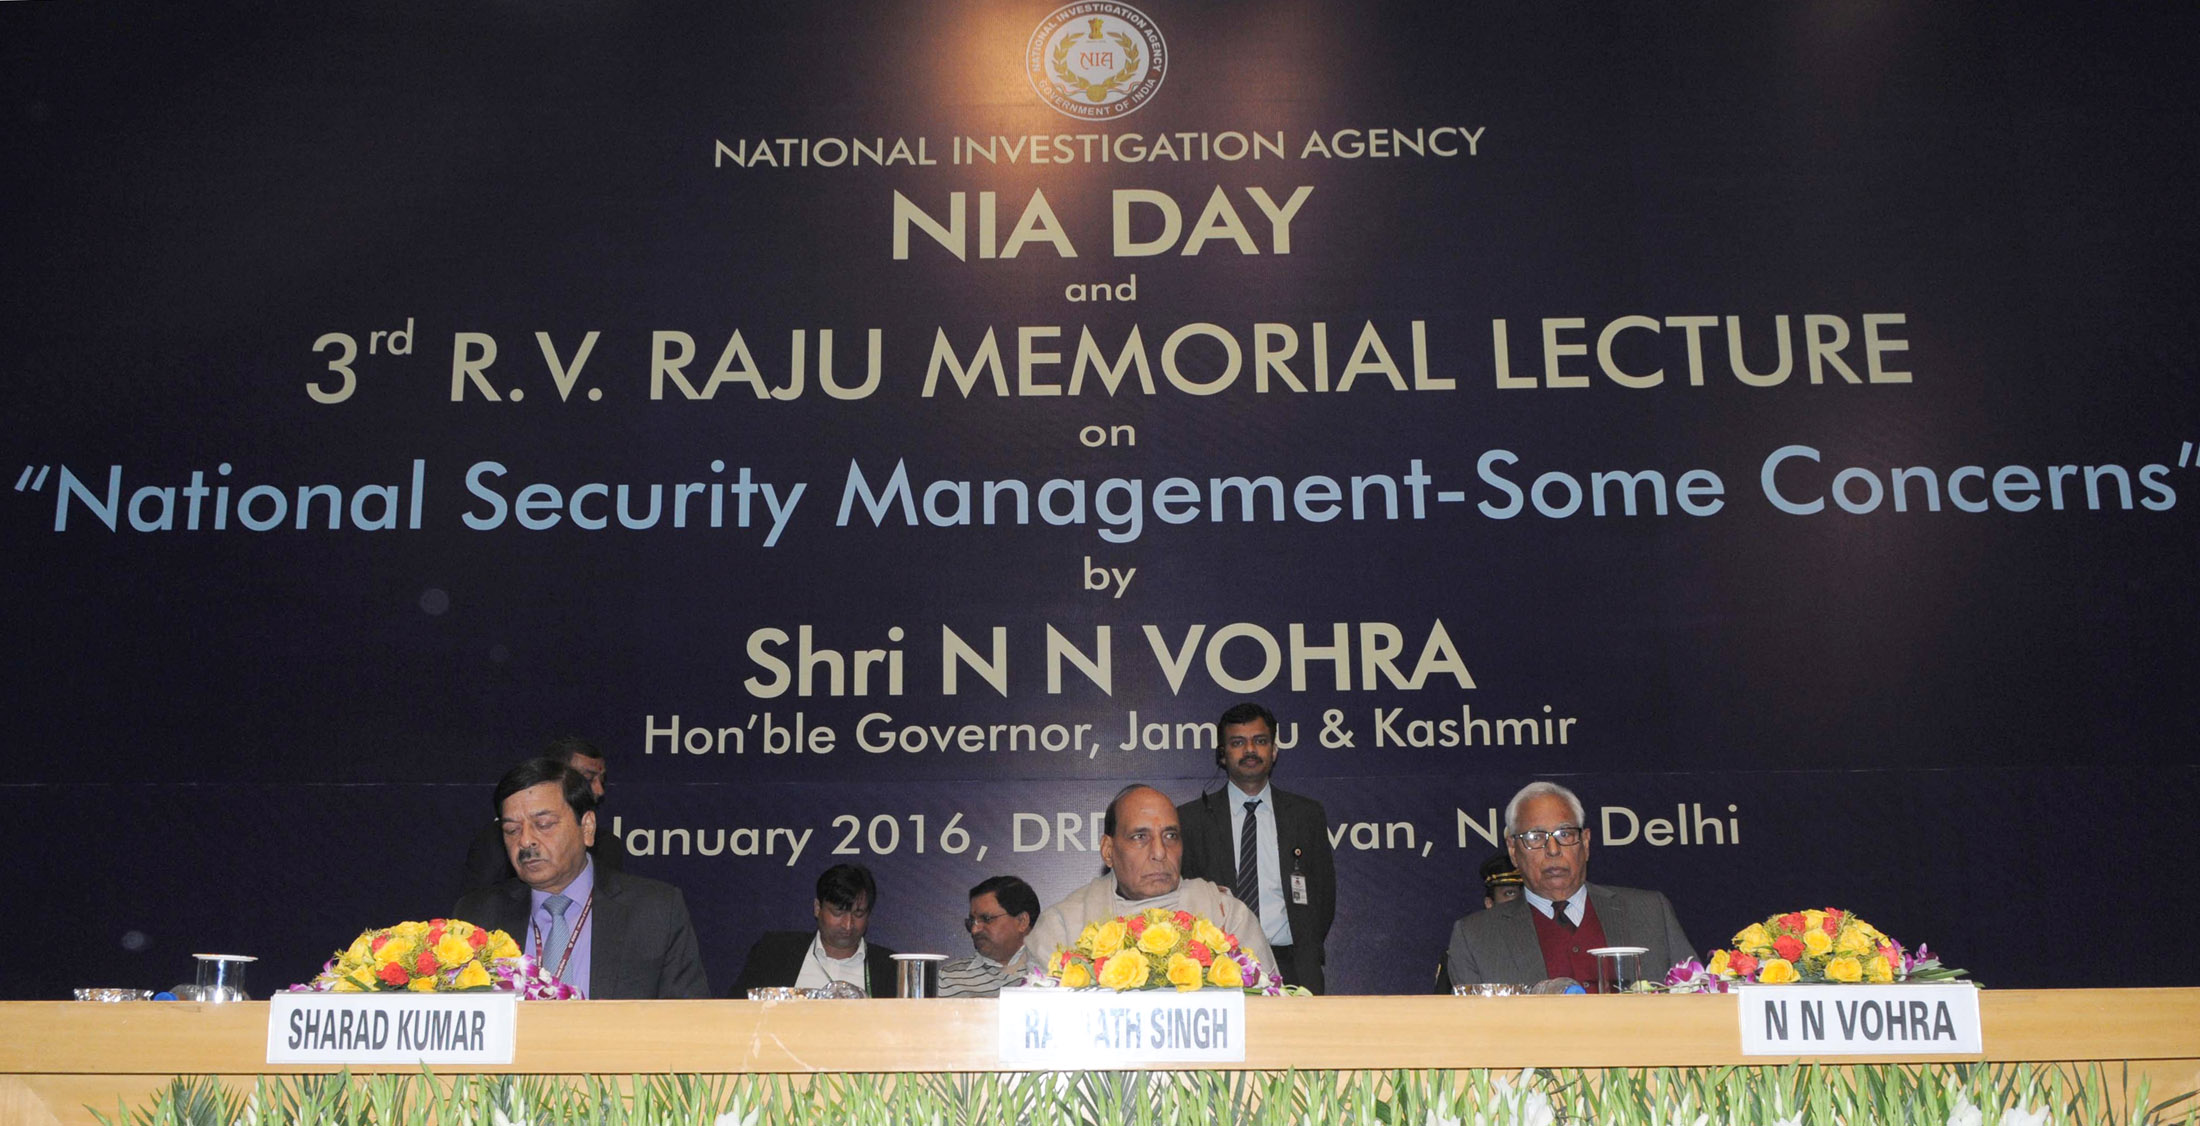 The Union Home Minister, Shri Rajnath Singh and the Governor of Jammu and Kashmir, Shri N.N. Vohra, at the National Investigation Agency (NIA) Day, in New Delhi on January 19, 2016.